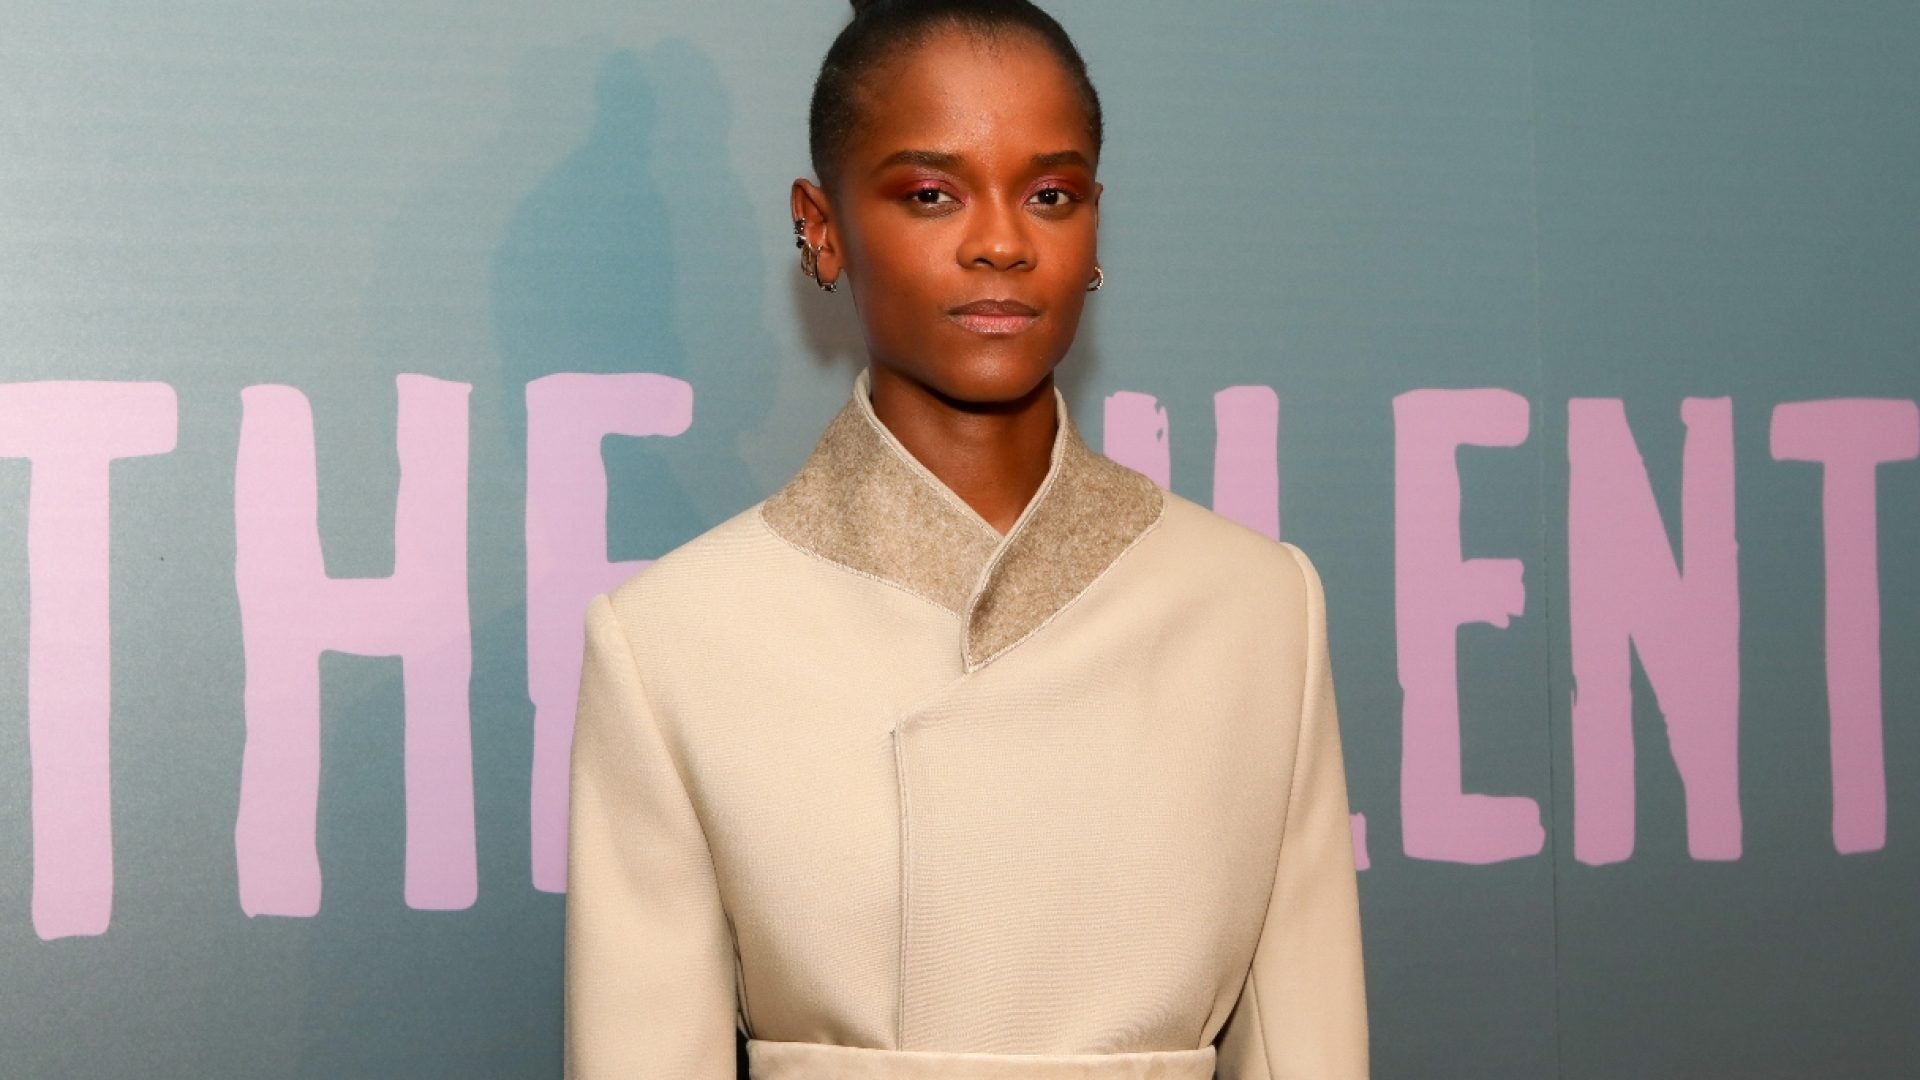 Letitia Wright Says June Gibbons Has Given 'The Silent Twins' Her Stamp Of Approval